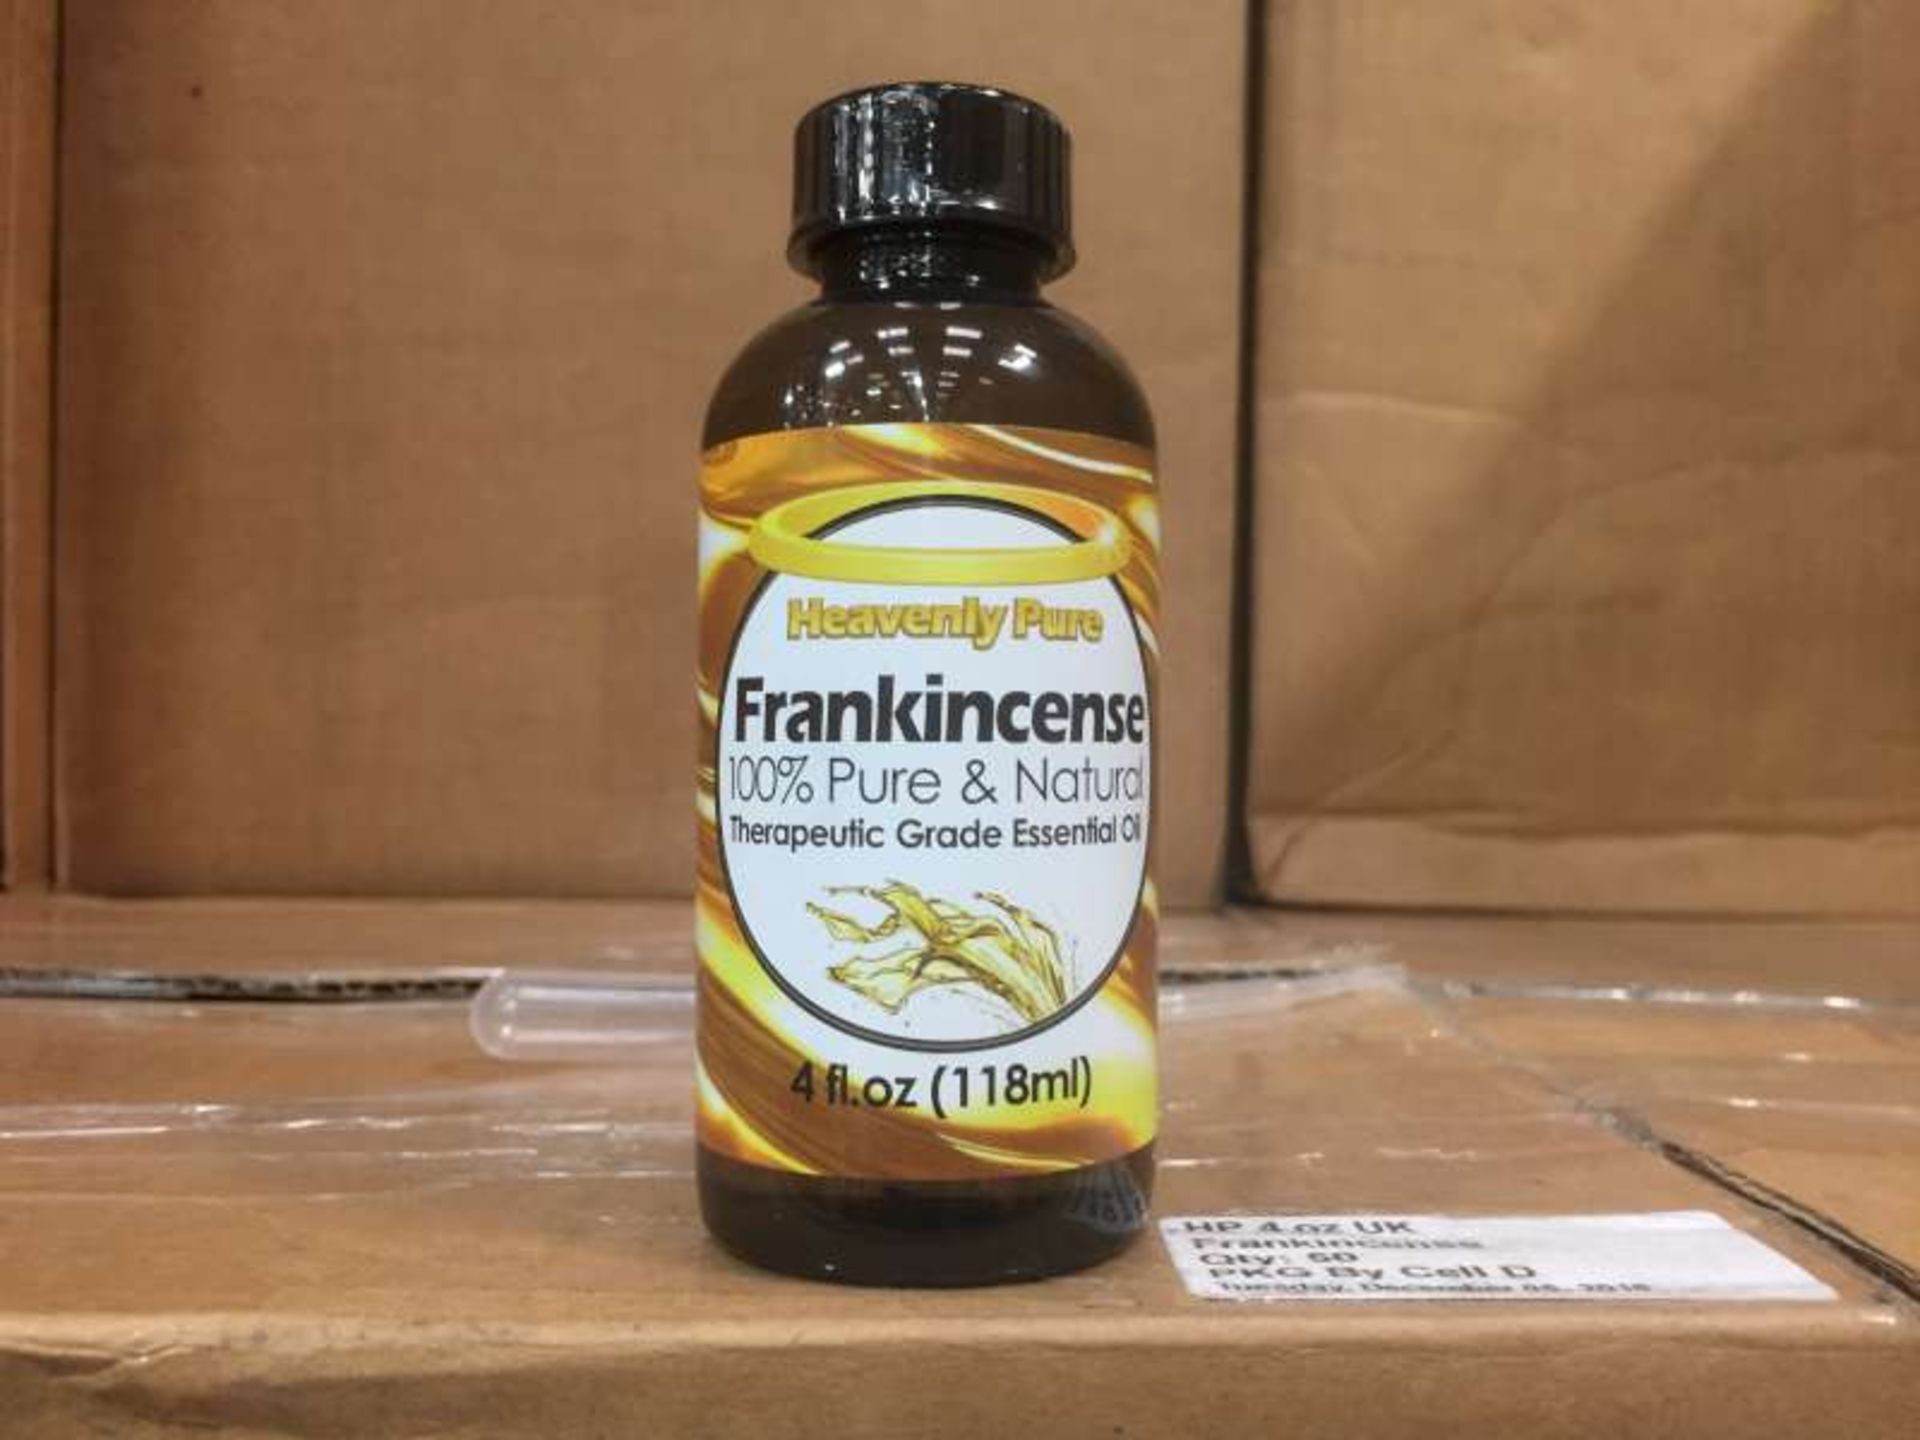 50 X 118 ML BOTTLES OF HEAVENLY PURE FRANKINCENSE 100% PURE AND NATURAL THERAPEUTIC GRADE